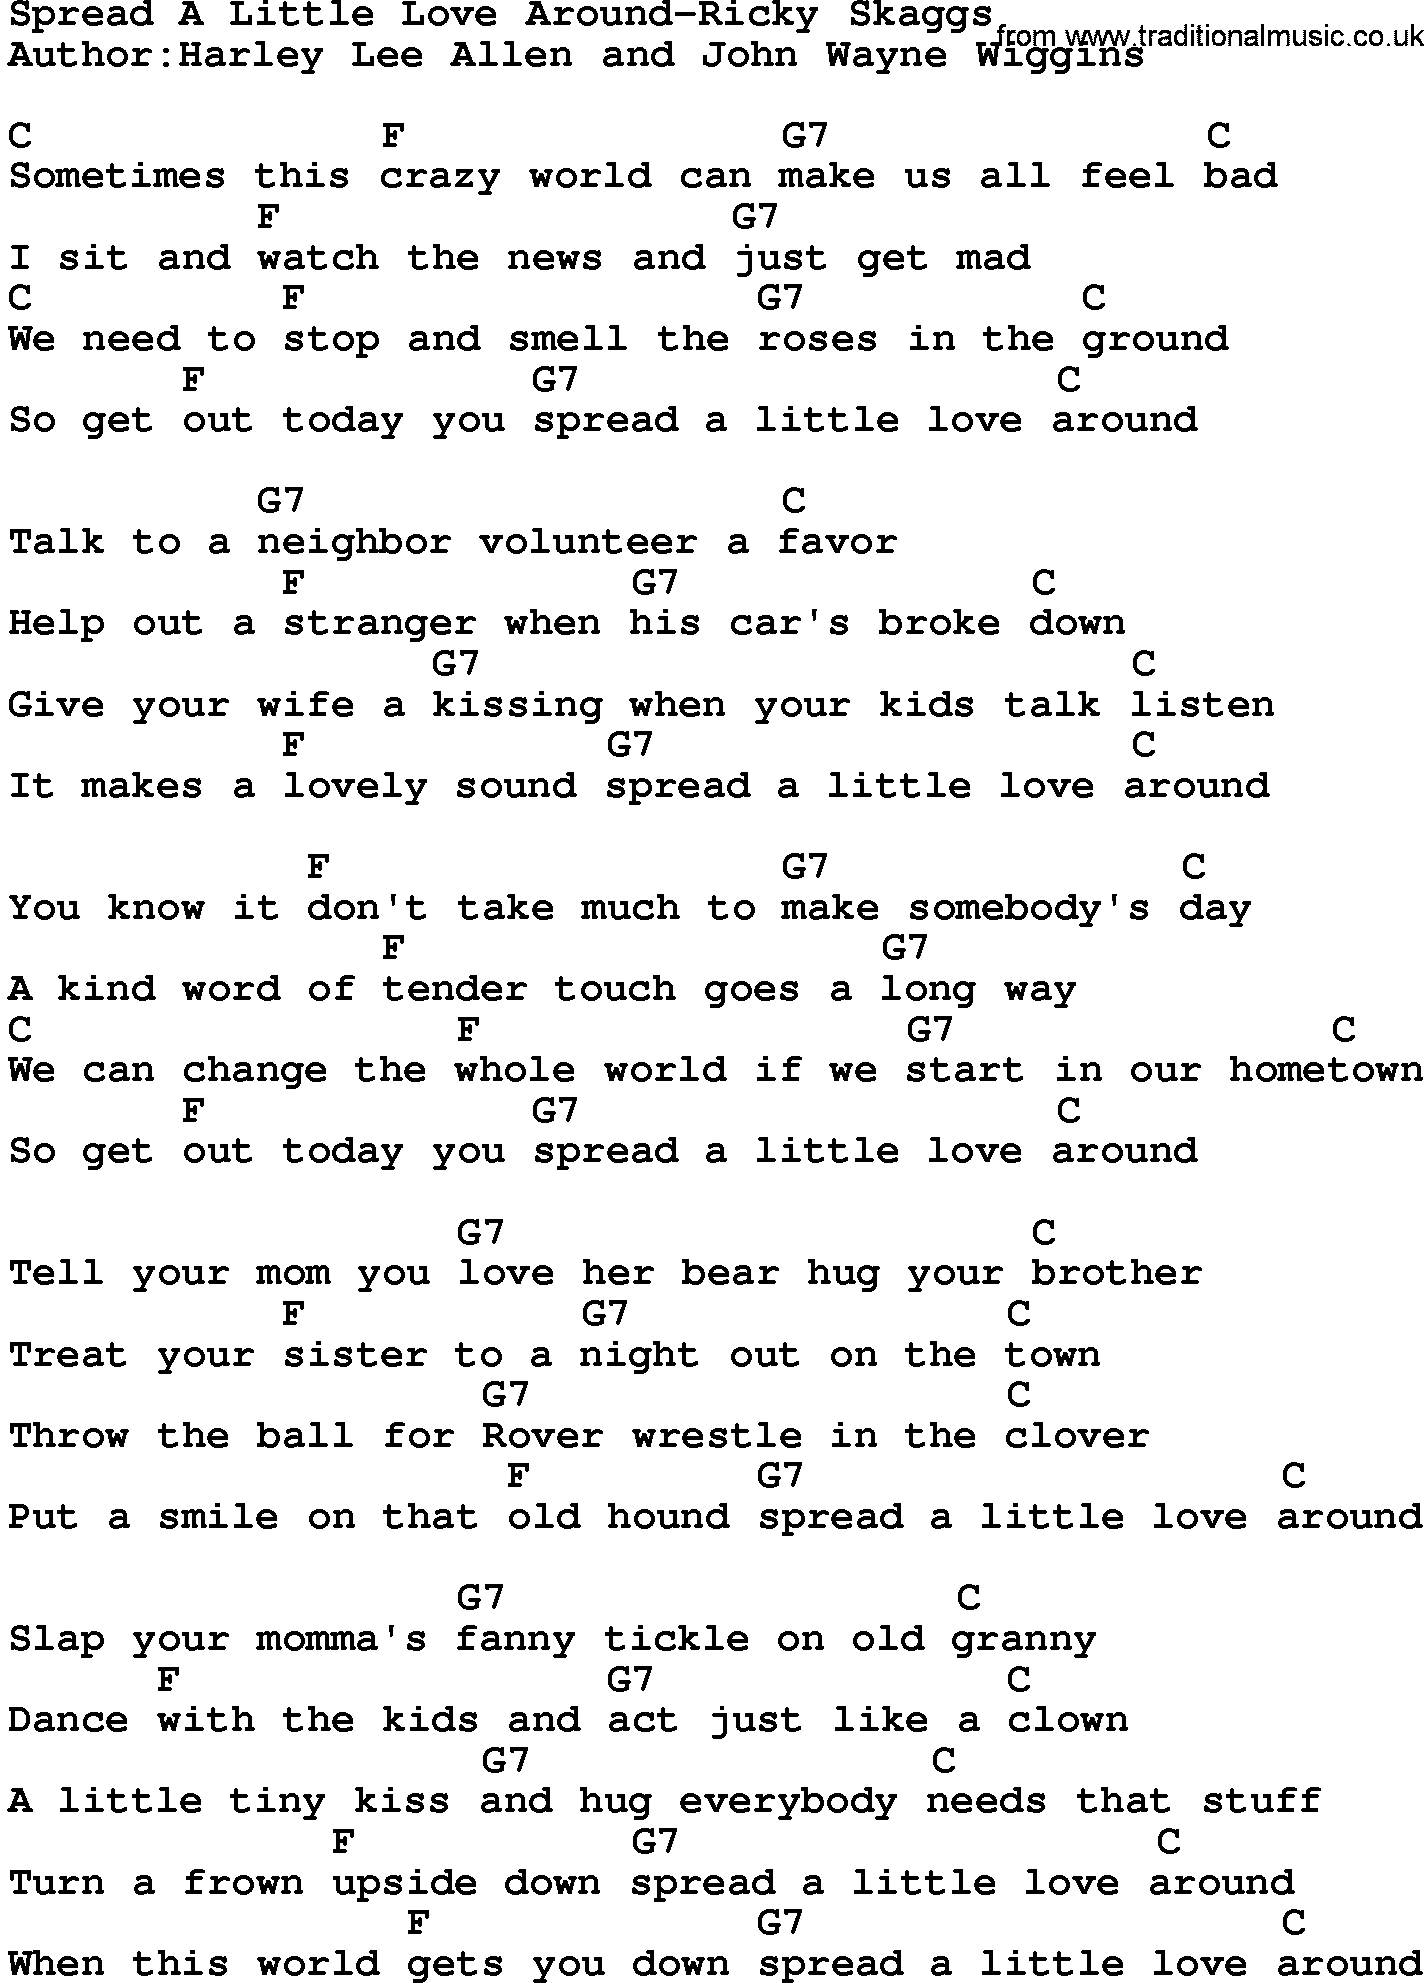 Country music song: Spread A Little Love Around-Ricky Skaggs lyrics and chords